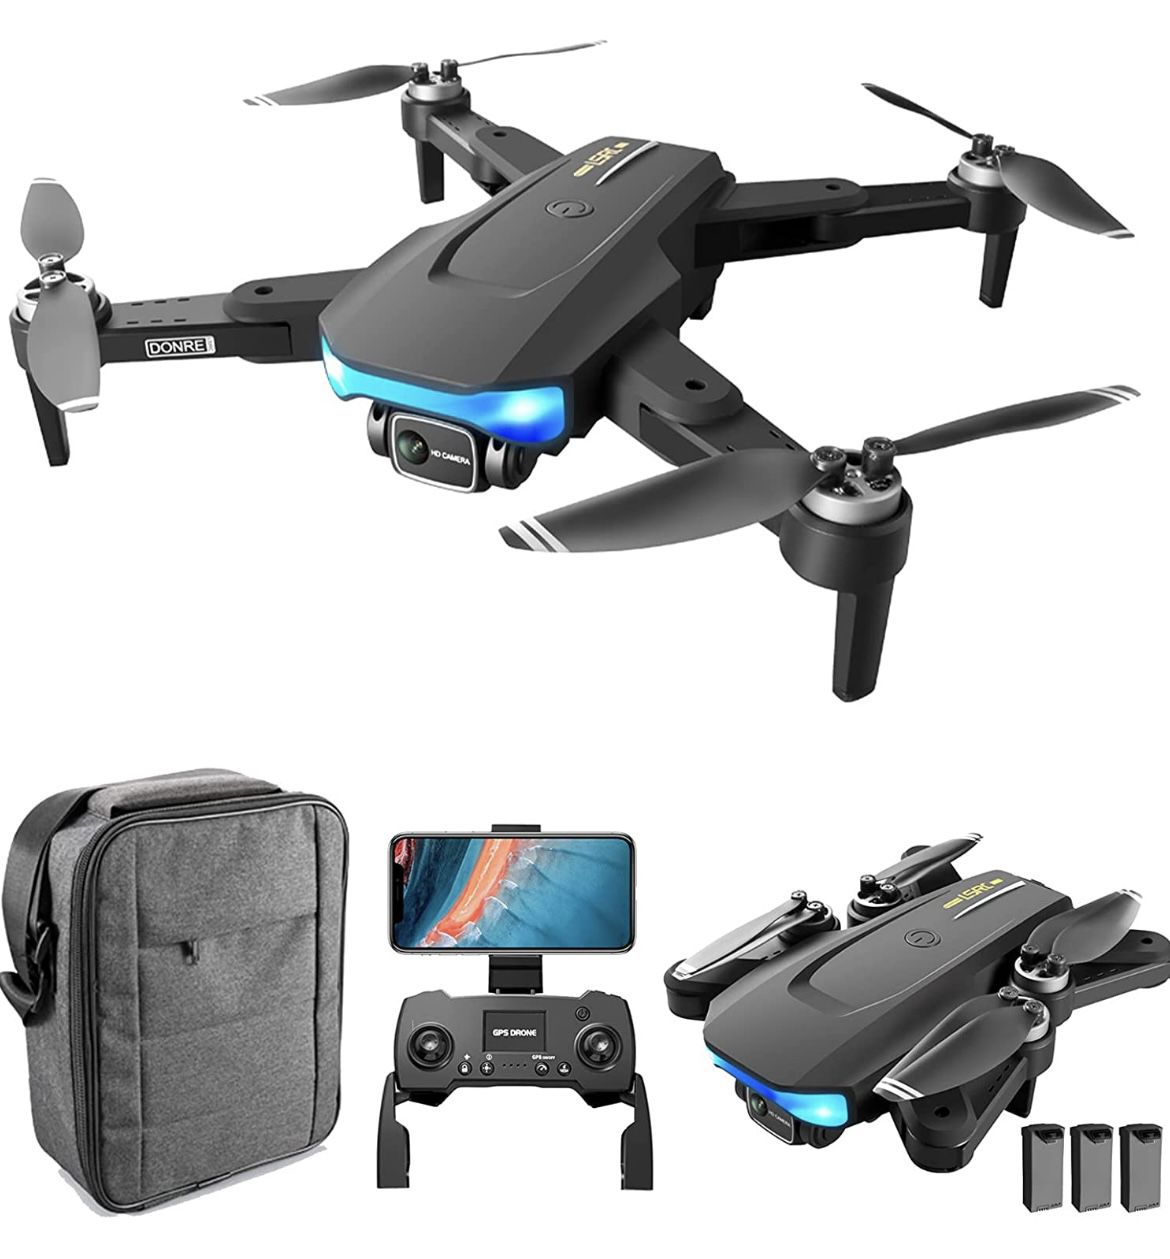 LS38 GPS Drone with 6K Camera, 5G Wi-Fi, 3 Batteries